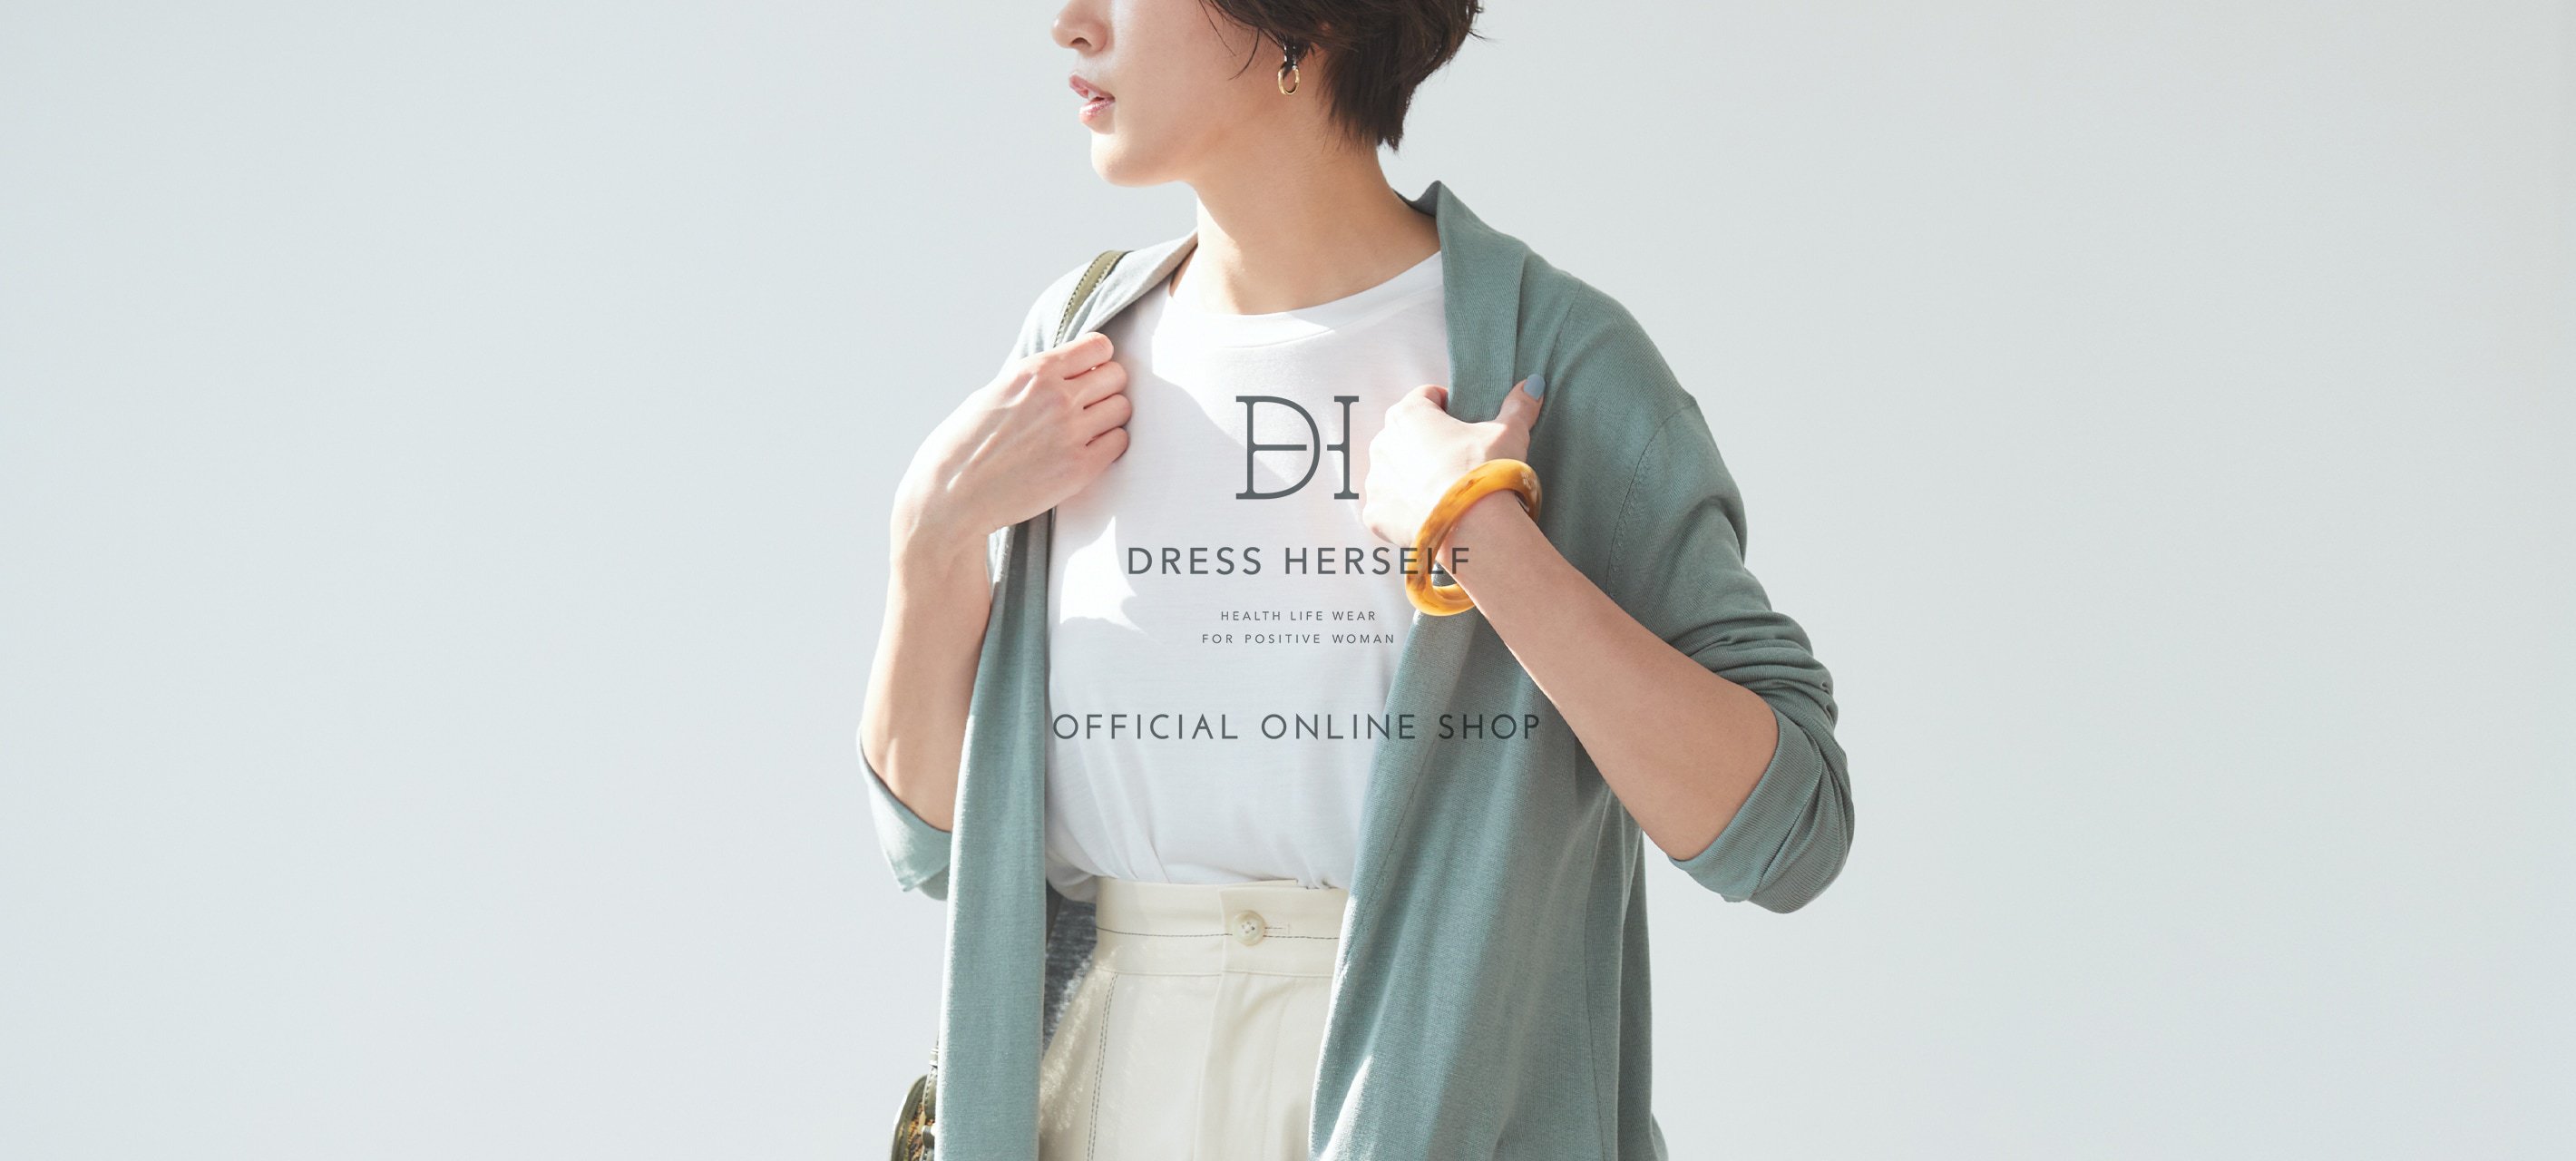 Dressher Self official site